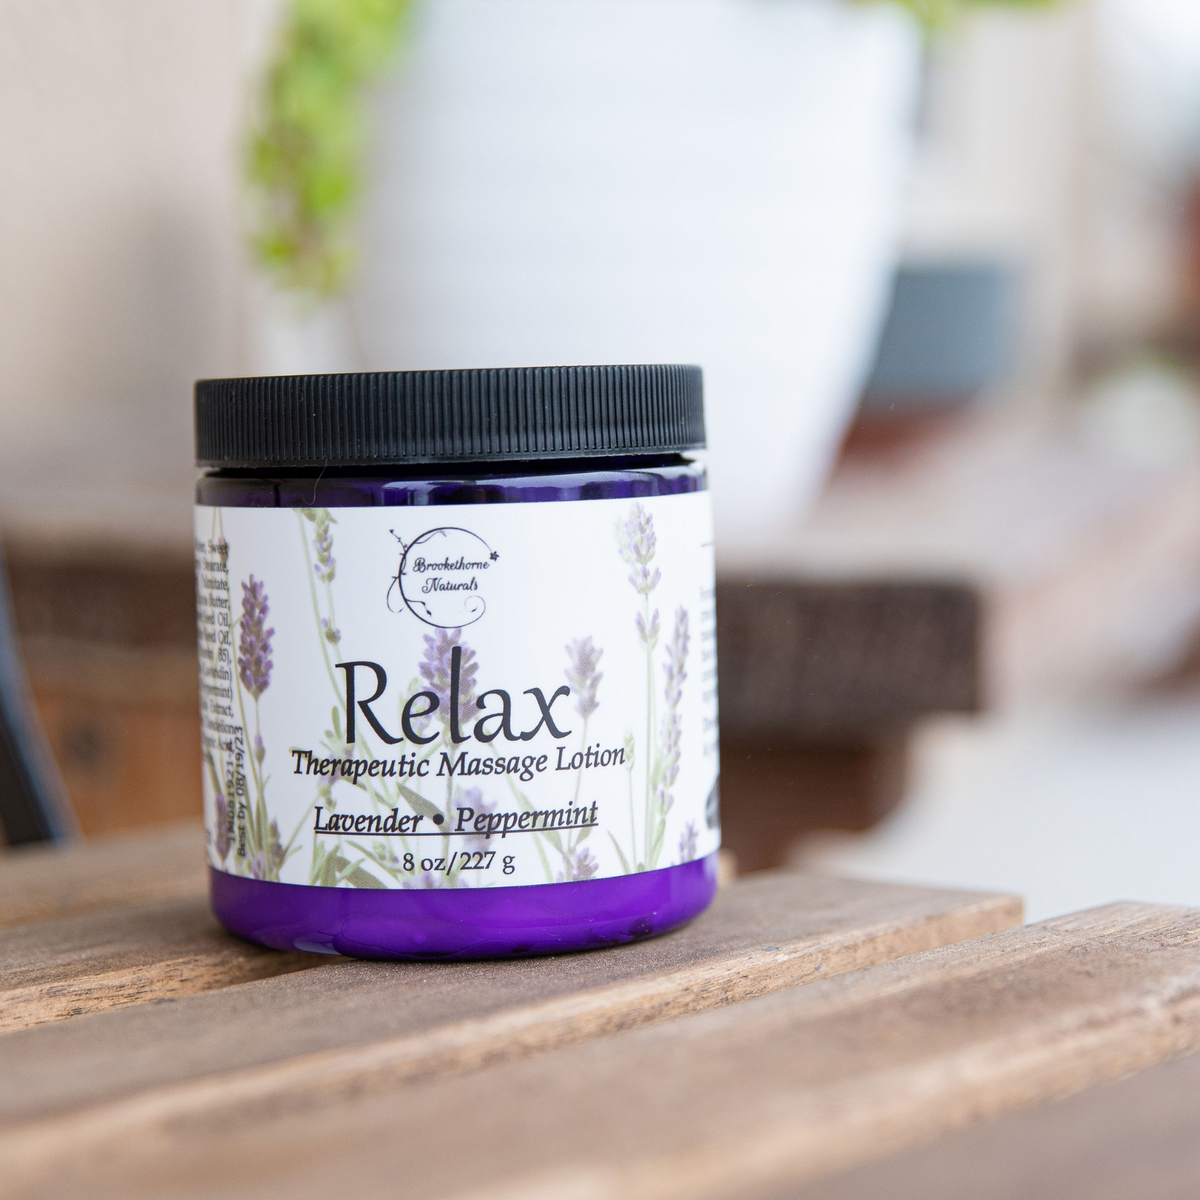 Relax Therapeutic Massage Lotion